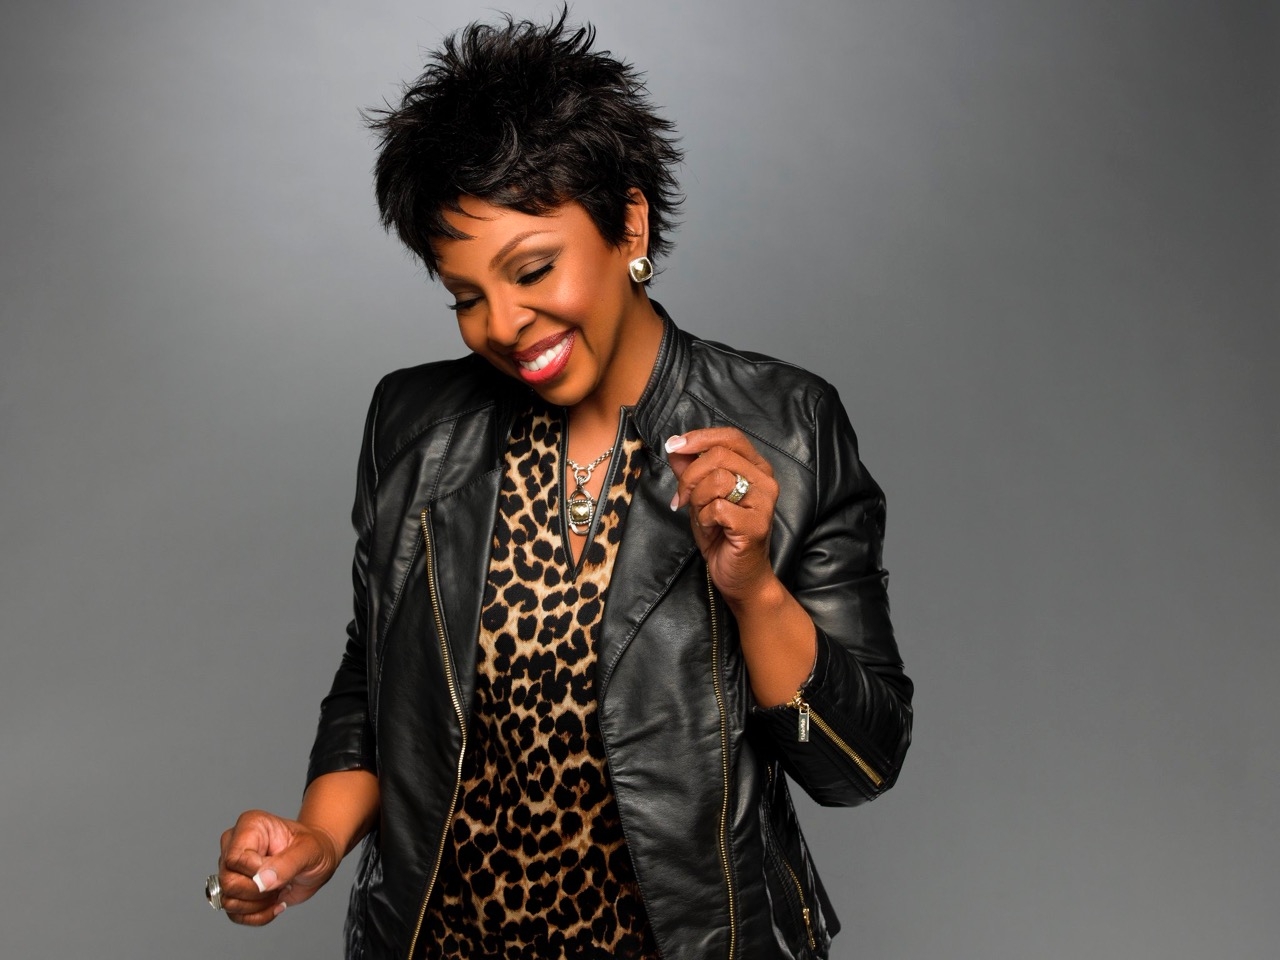 Gladys Knight sues son over chicken and waffles restaurants